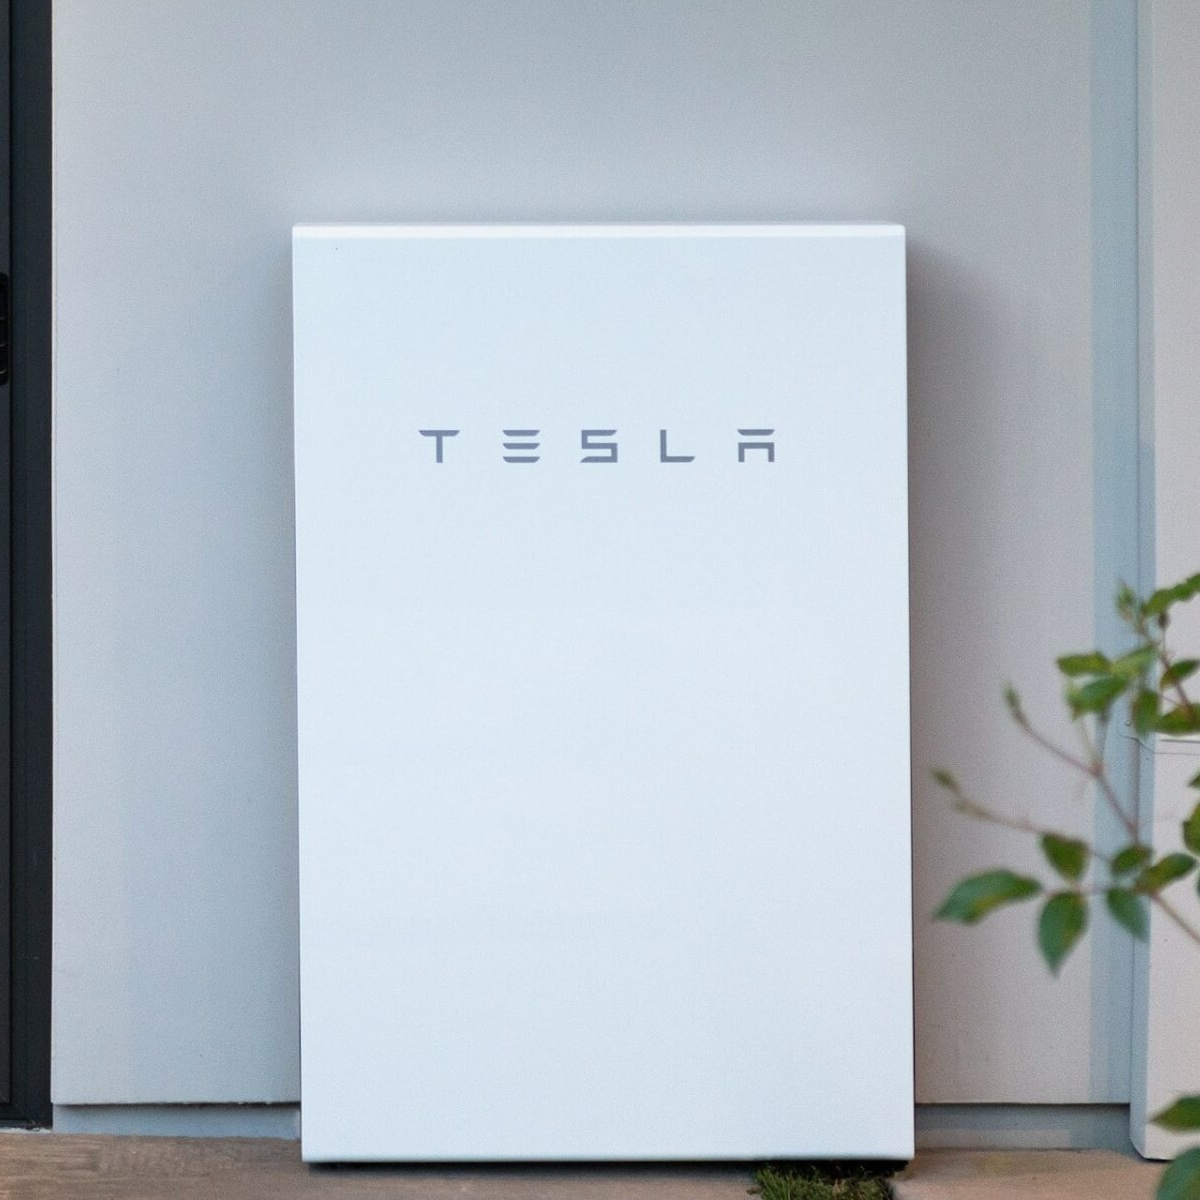 JUST IN: SunPower will now be including Tesla's $TSLA Powerwall to its solar offerings

$SPWR up +16% pre-market